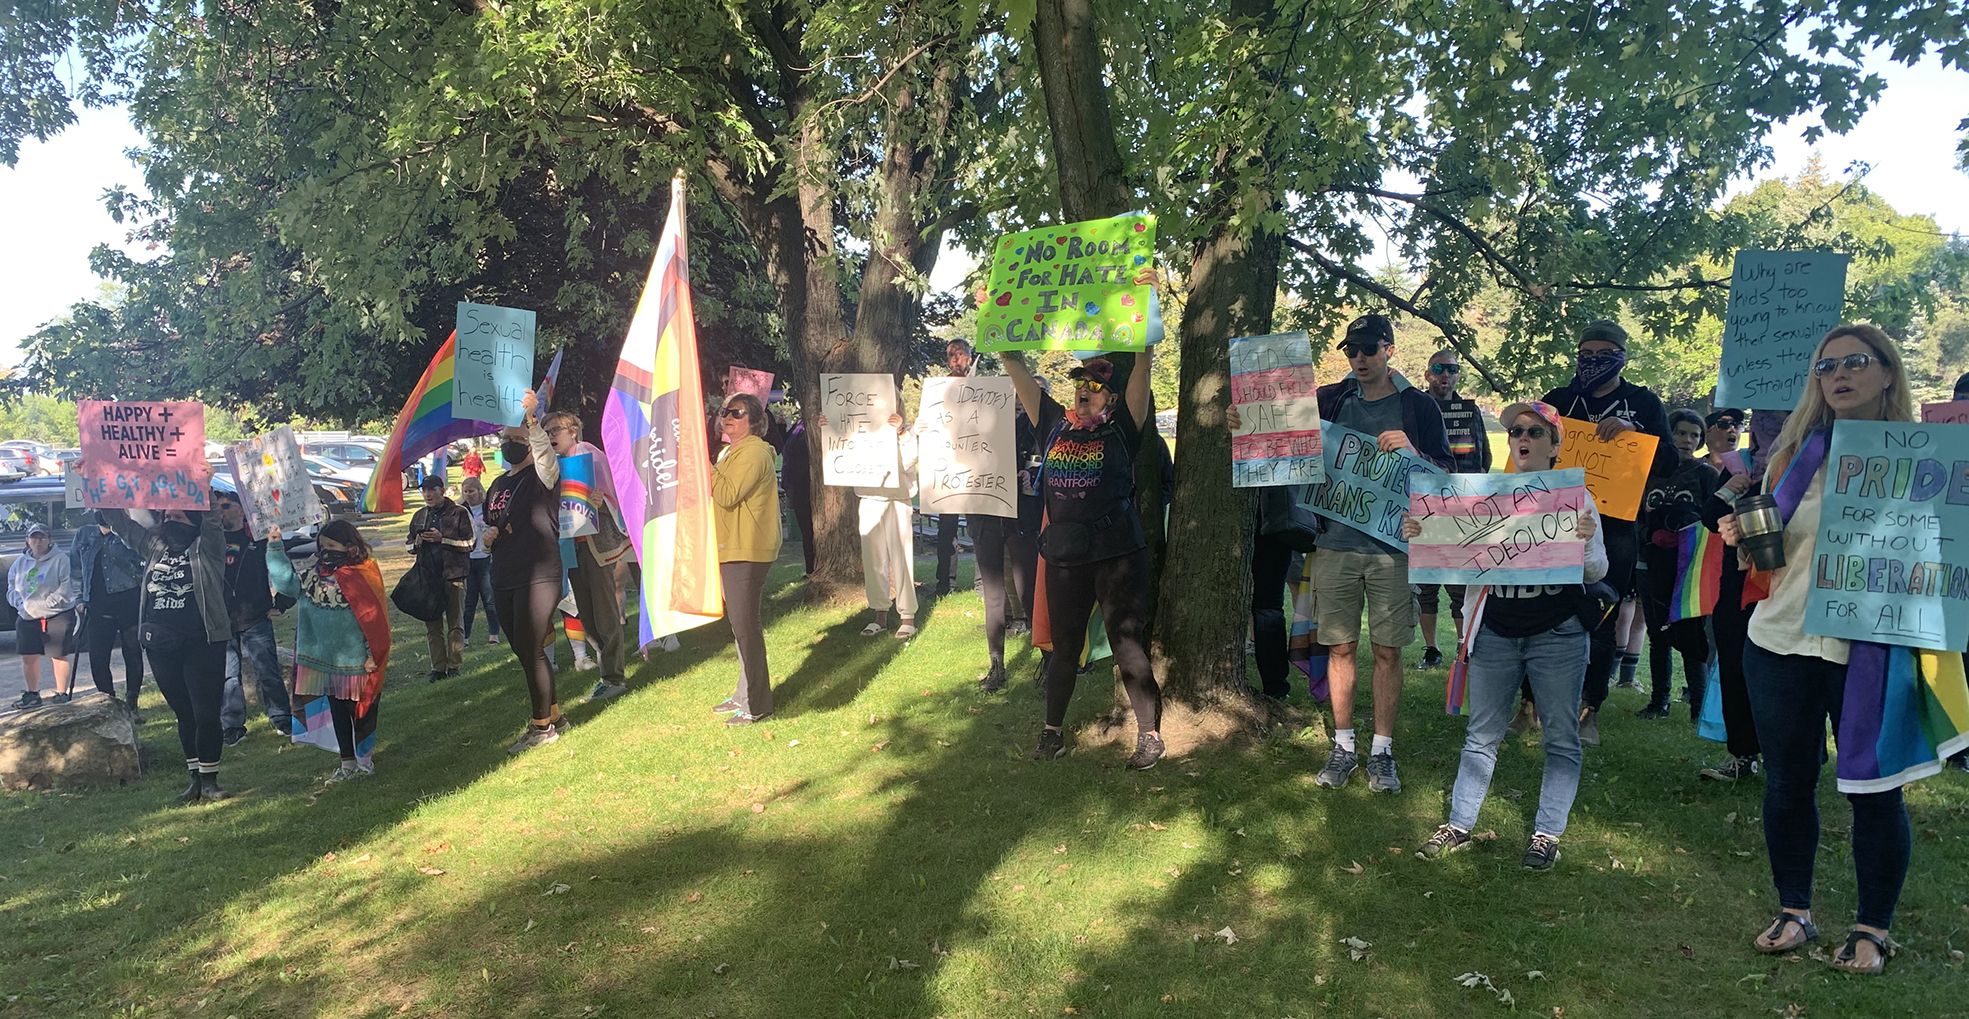 Opposing sides on gender identity education rally in Mohawk Park